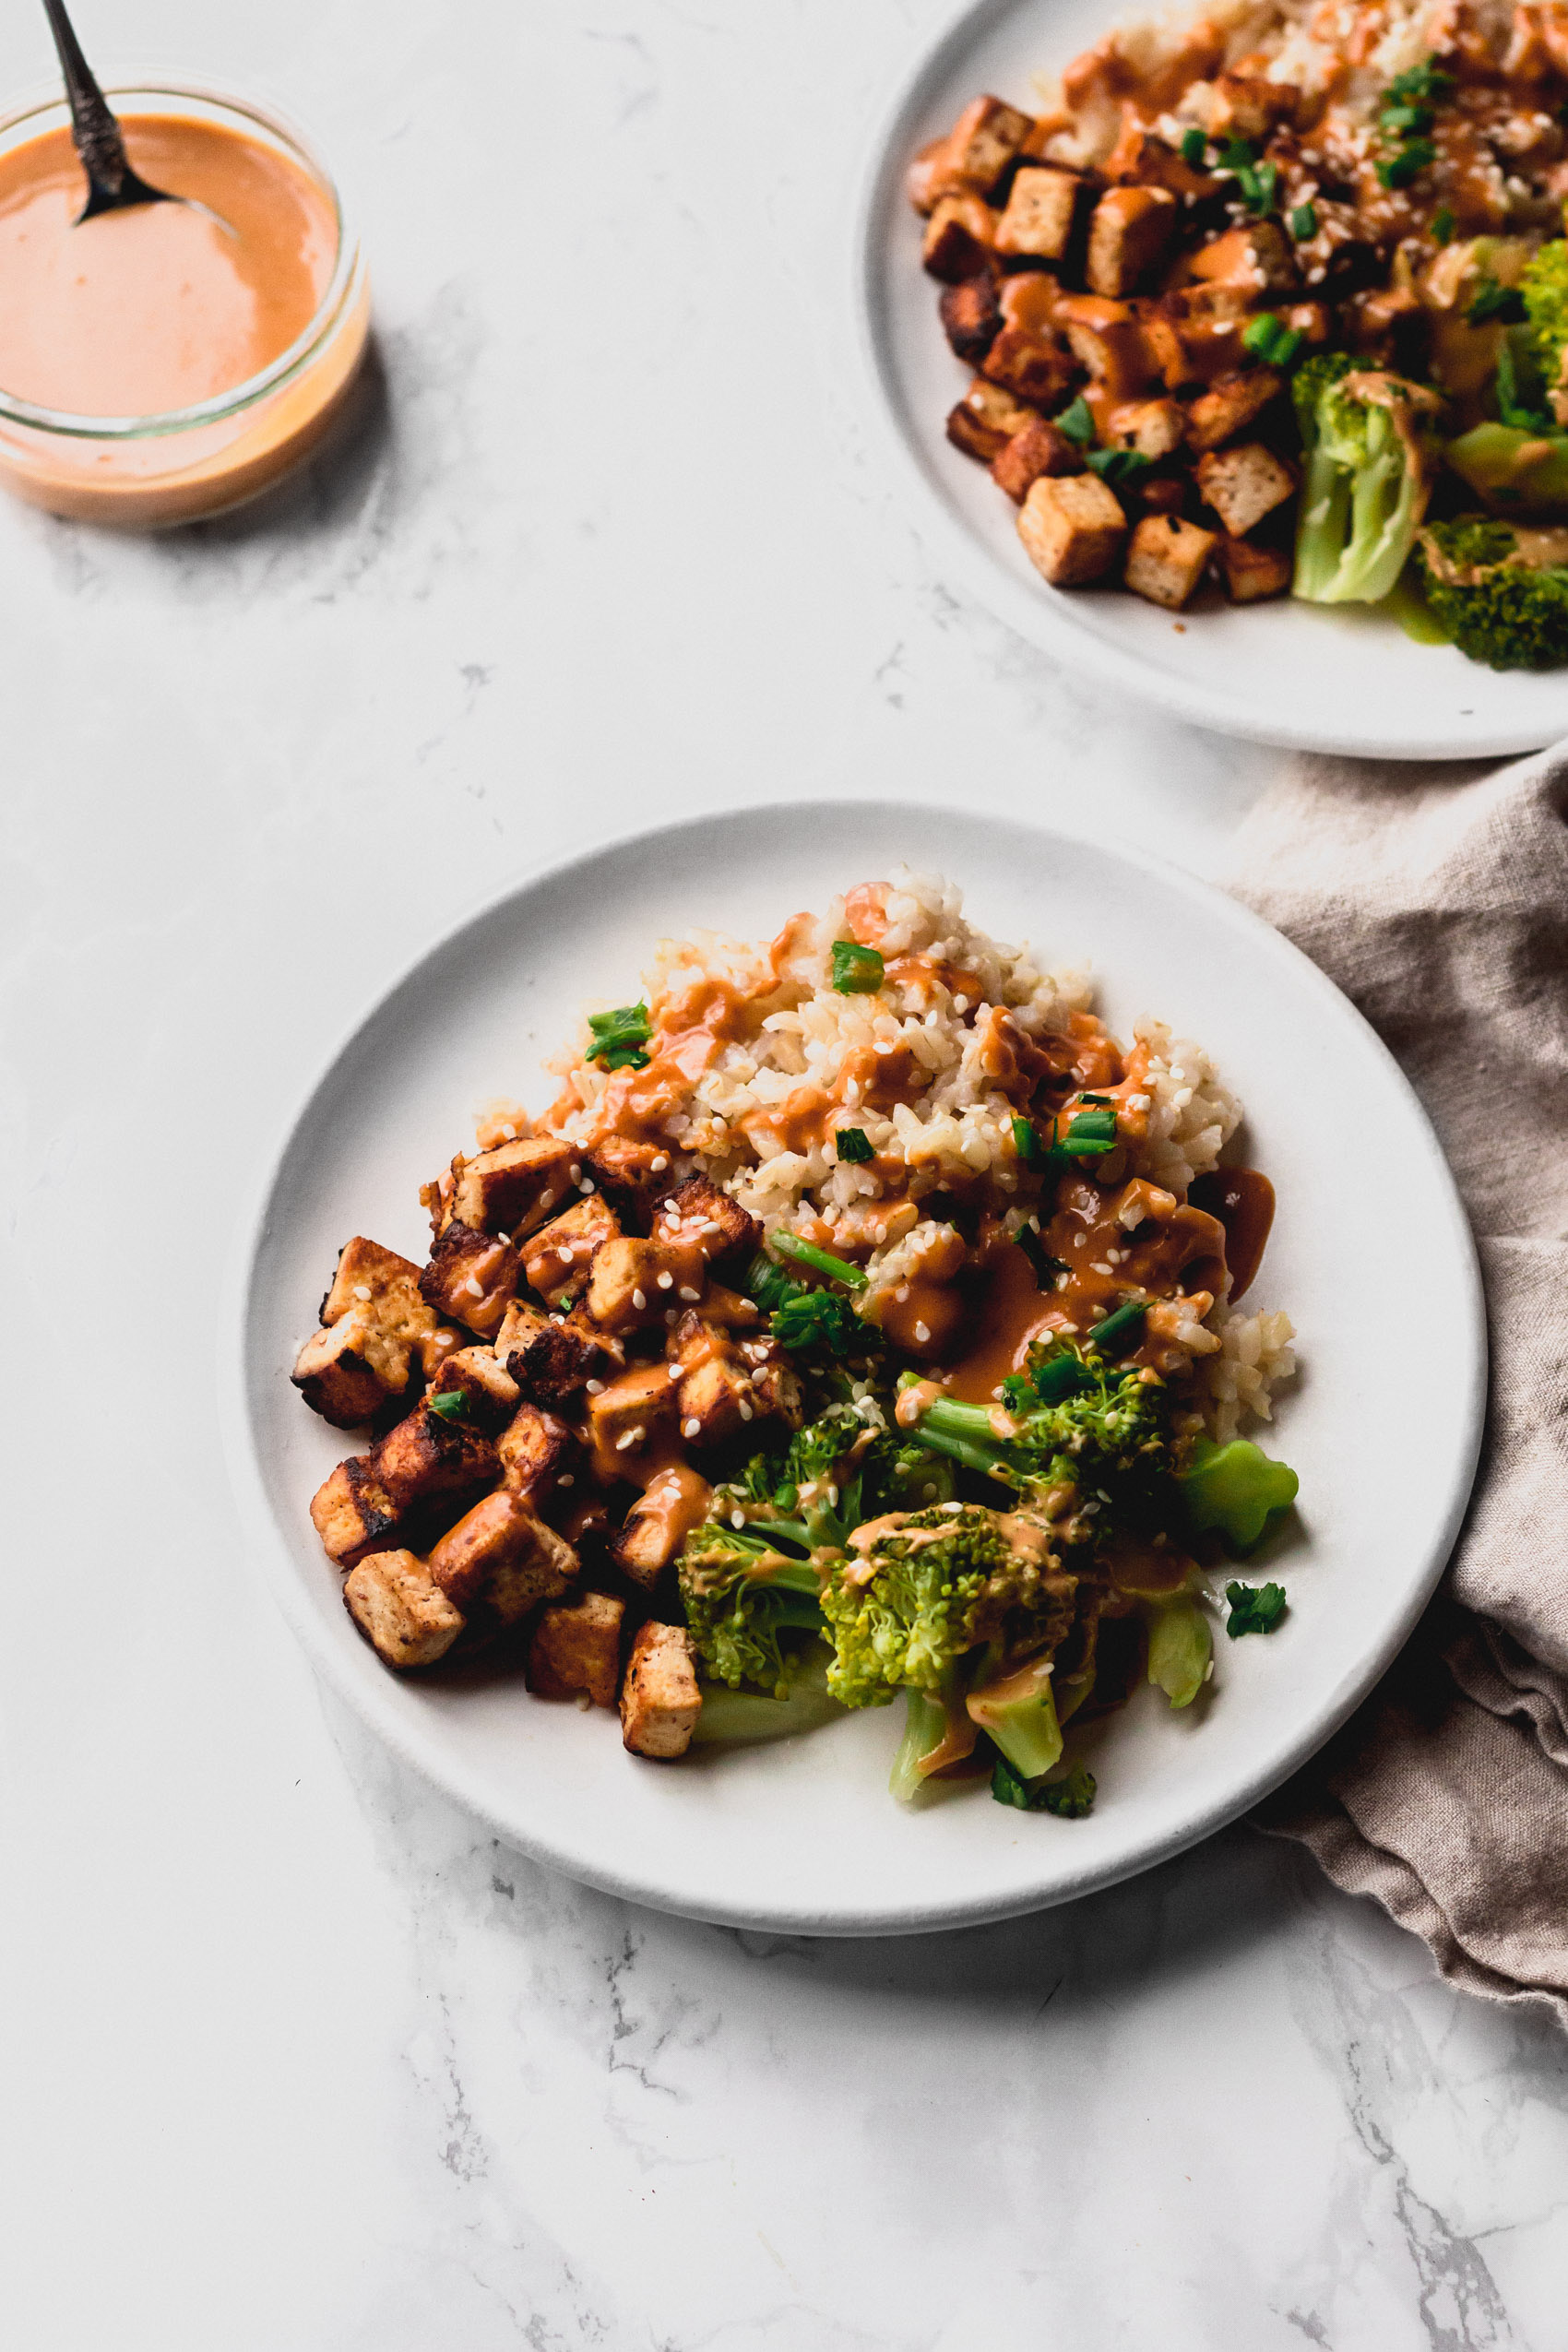 a rice bowl served with broccoli, tofu and a spicy peanut sauce